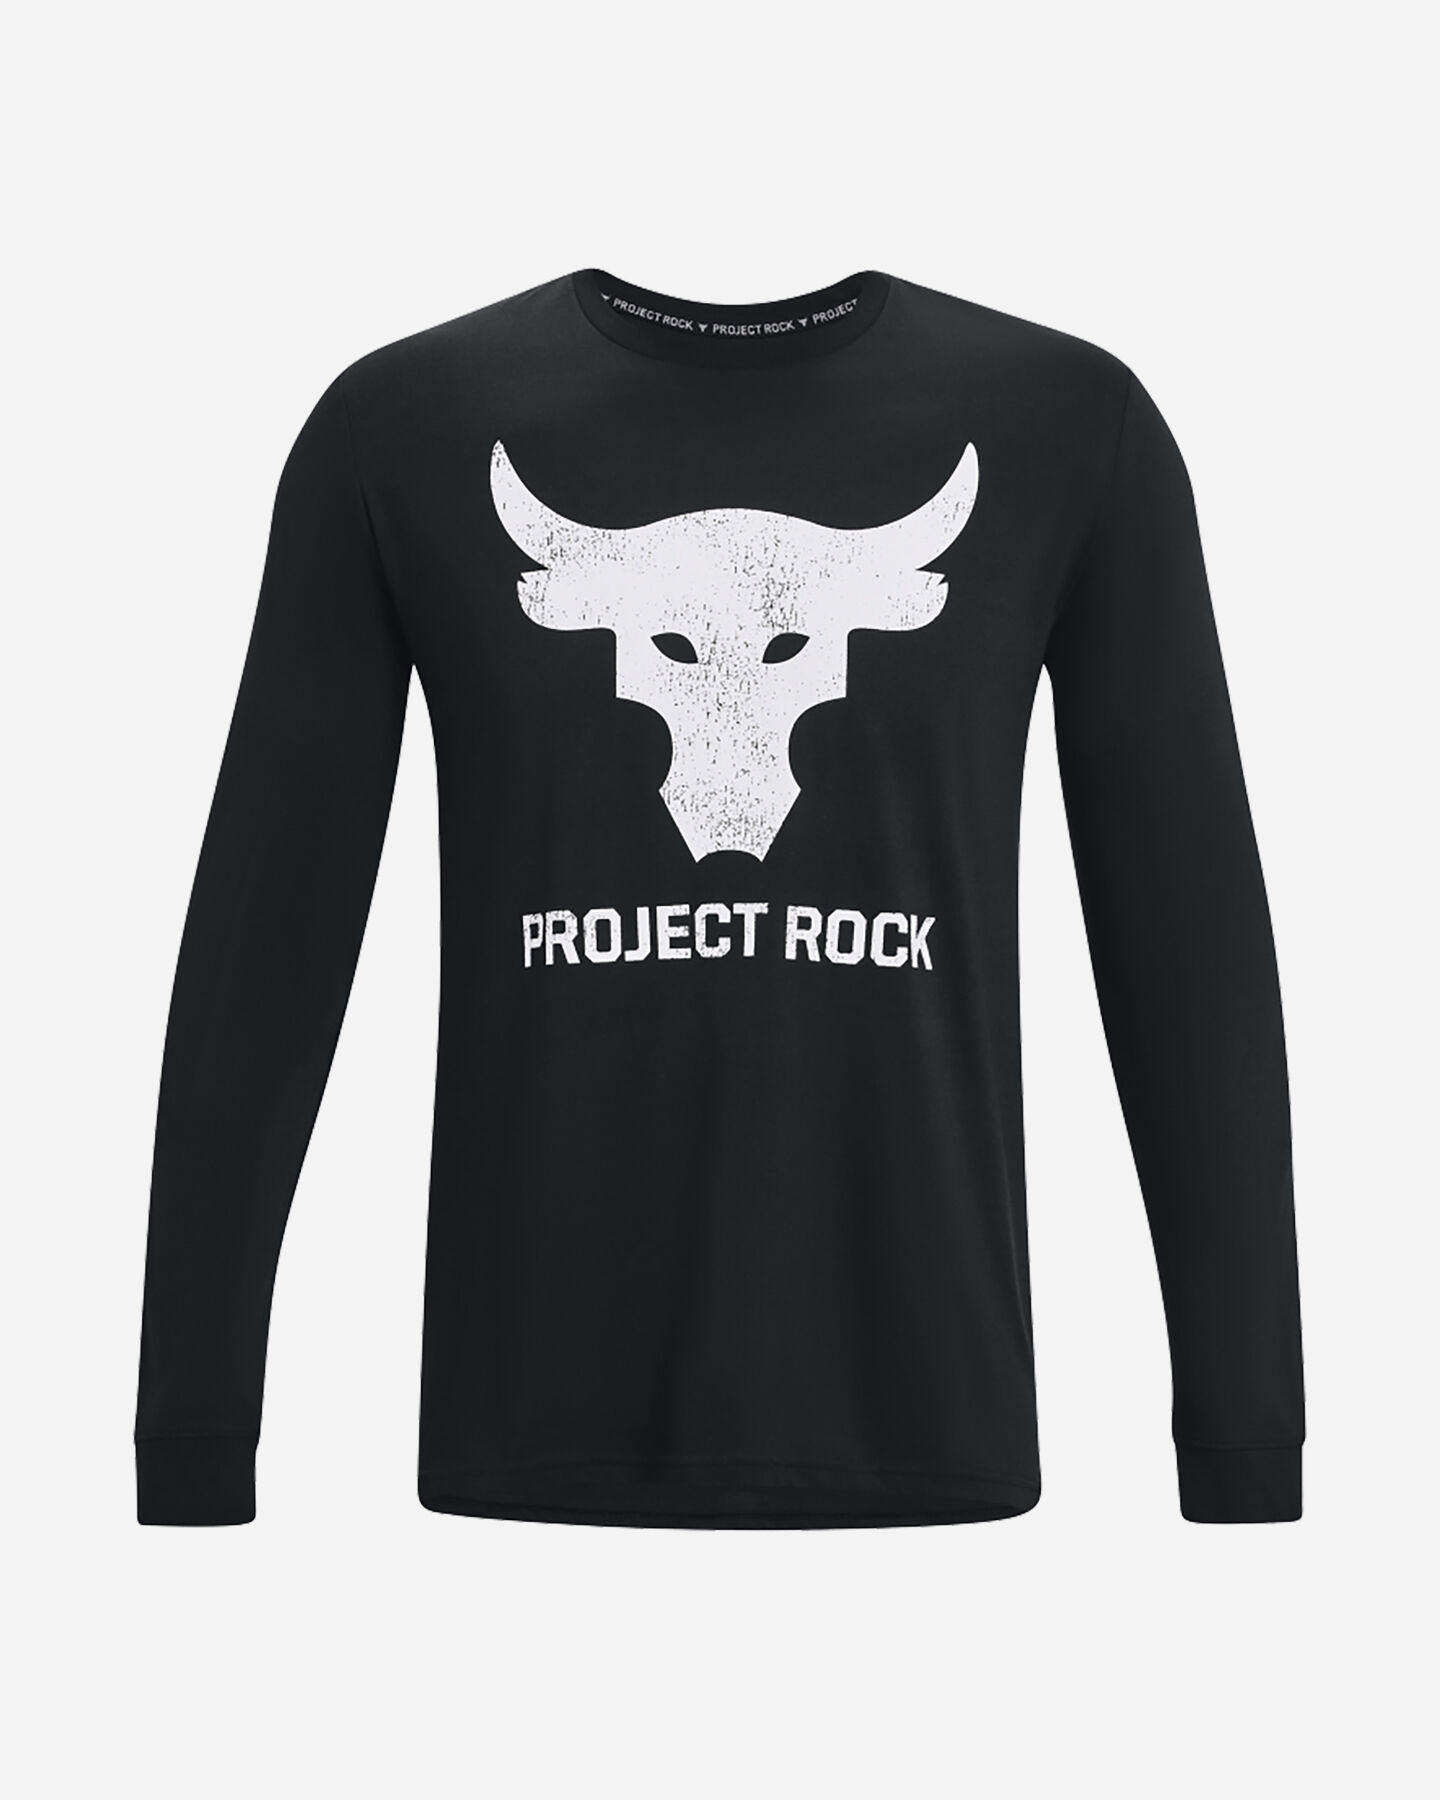  T-Shirt UNDER ARMOUR PROJECT ROCK M S5459586|0001|XS scatto 0